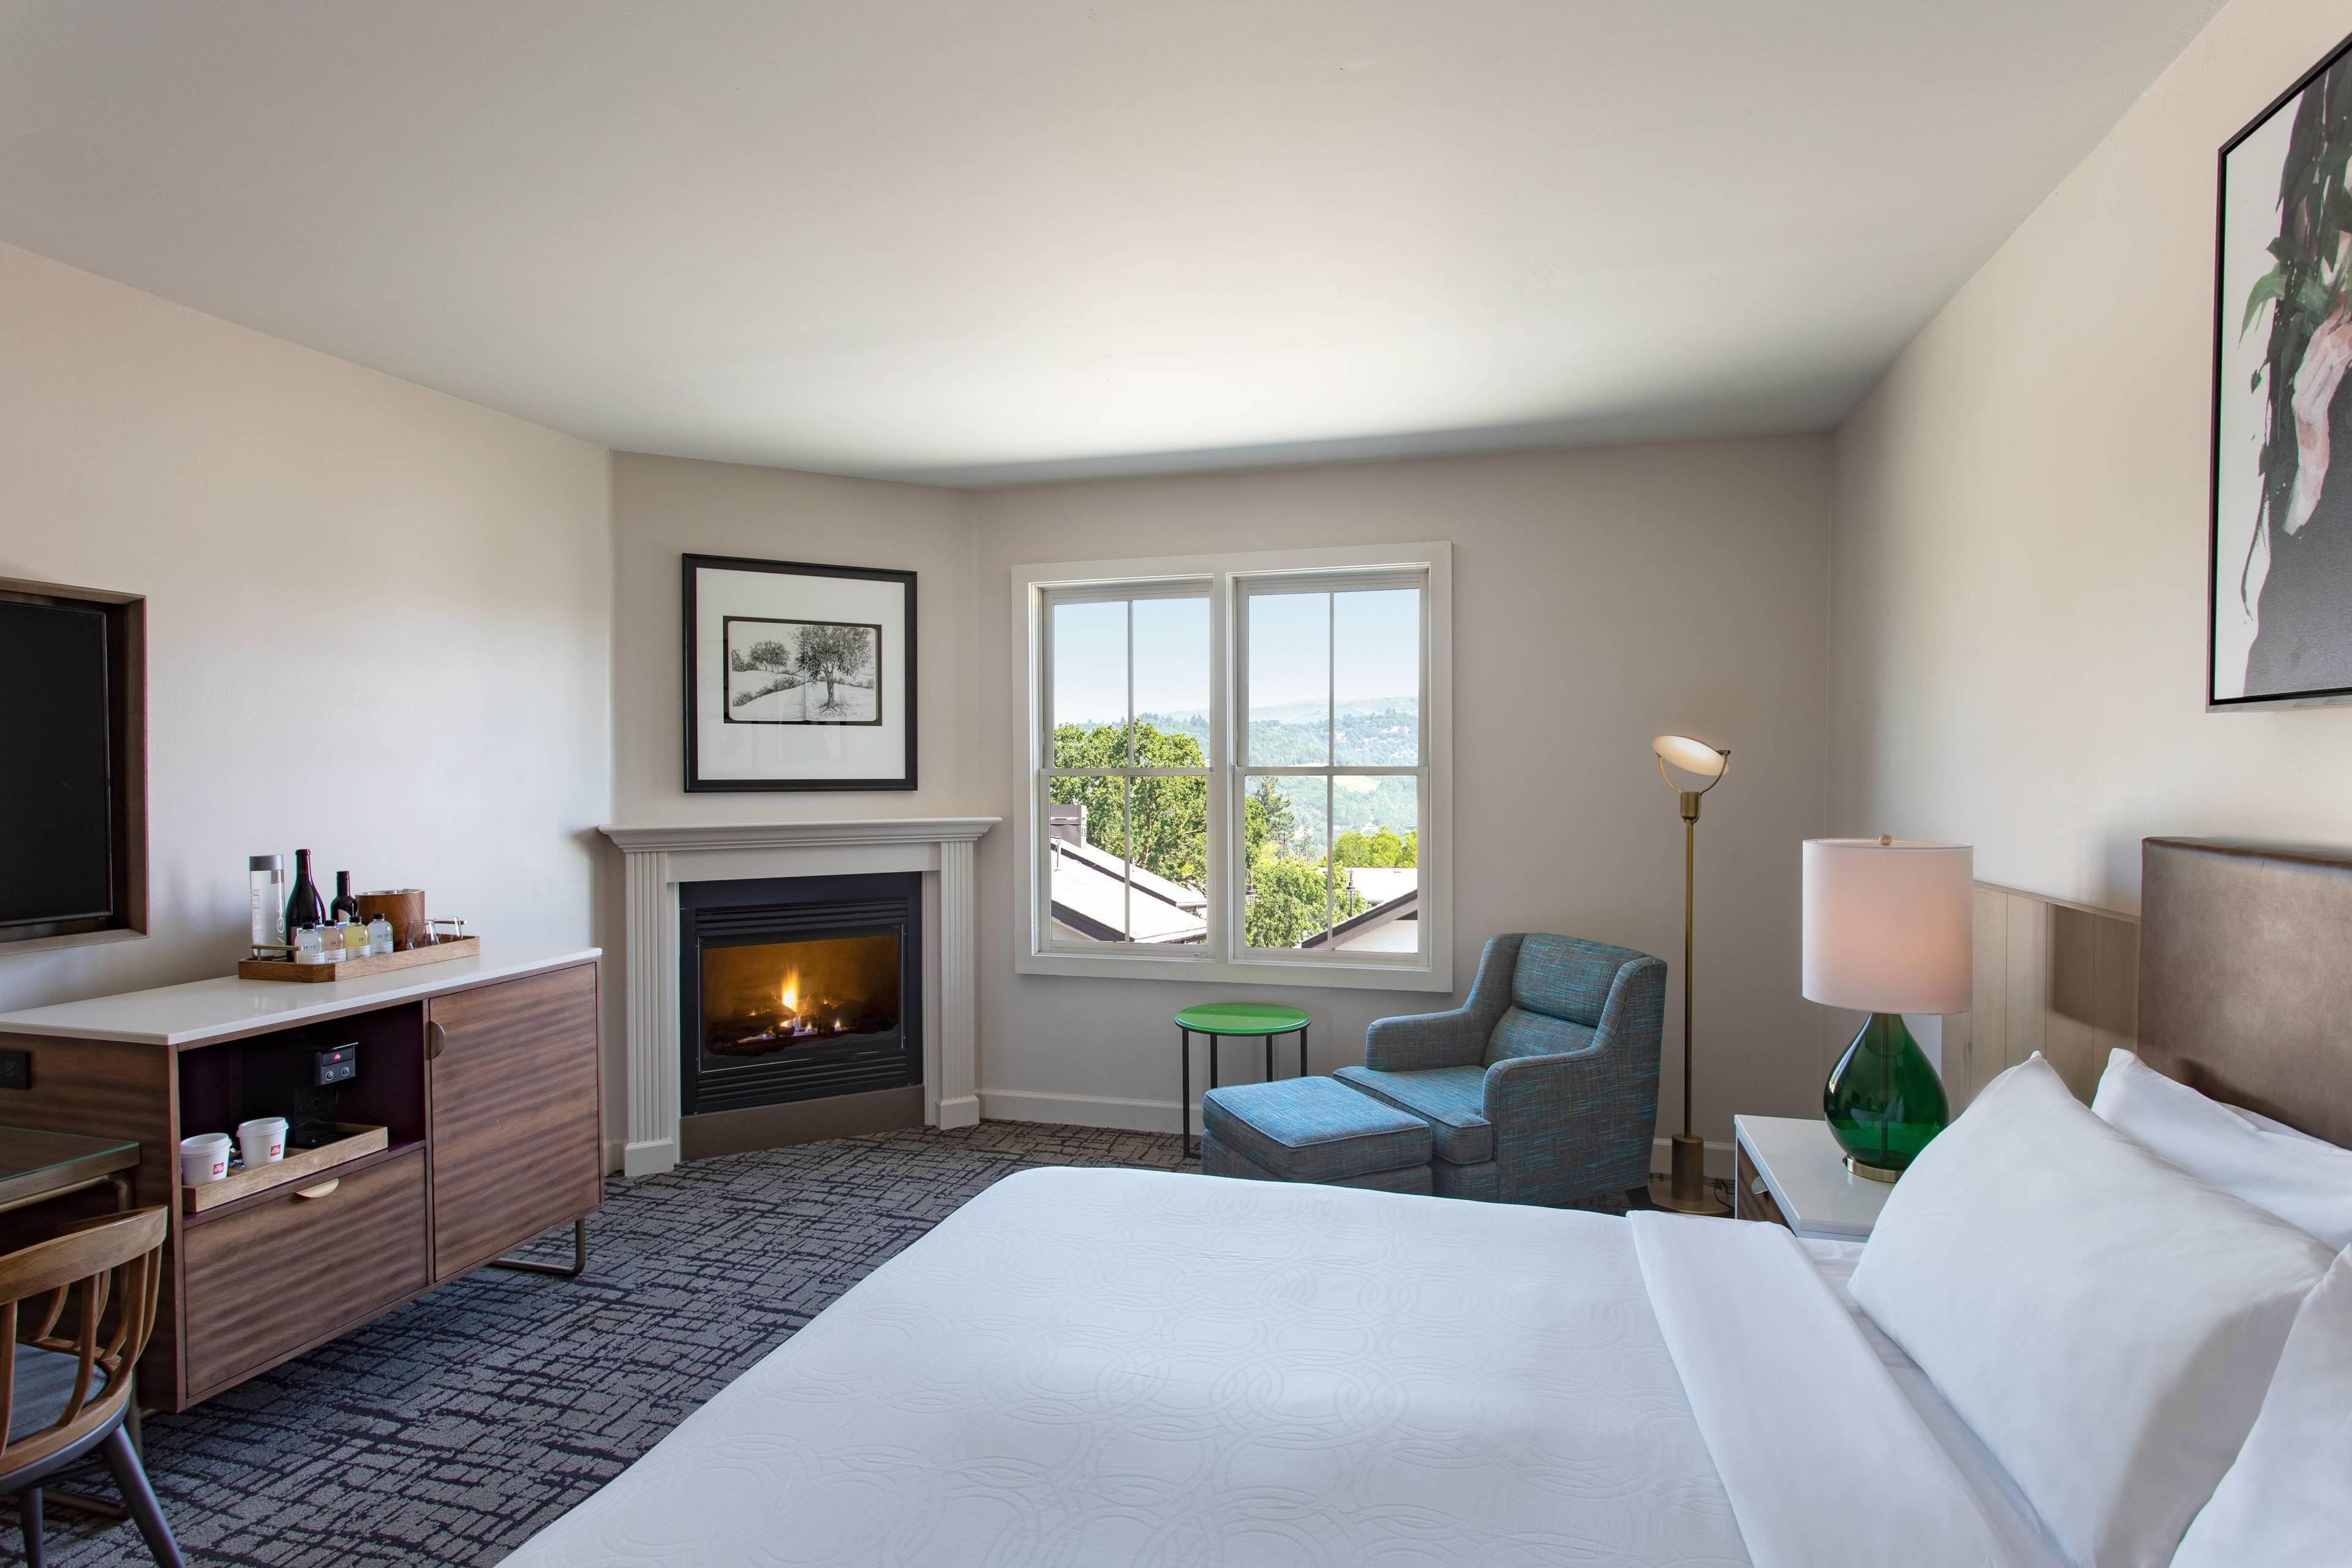 With a plush bed, pillow-top mattress, designer duvet, cozy fireplace, and an array of crafted signature amenities, it’s easy to unwind in a spacious Lodge King.